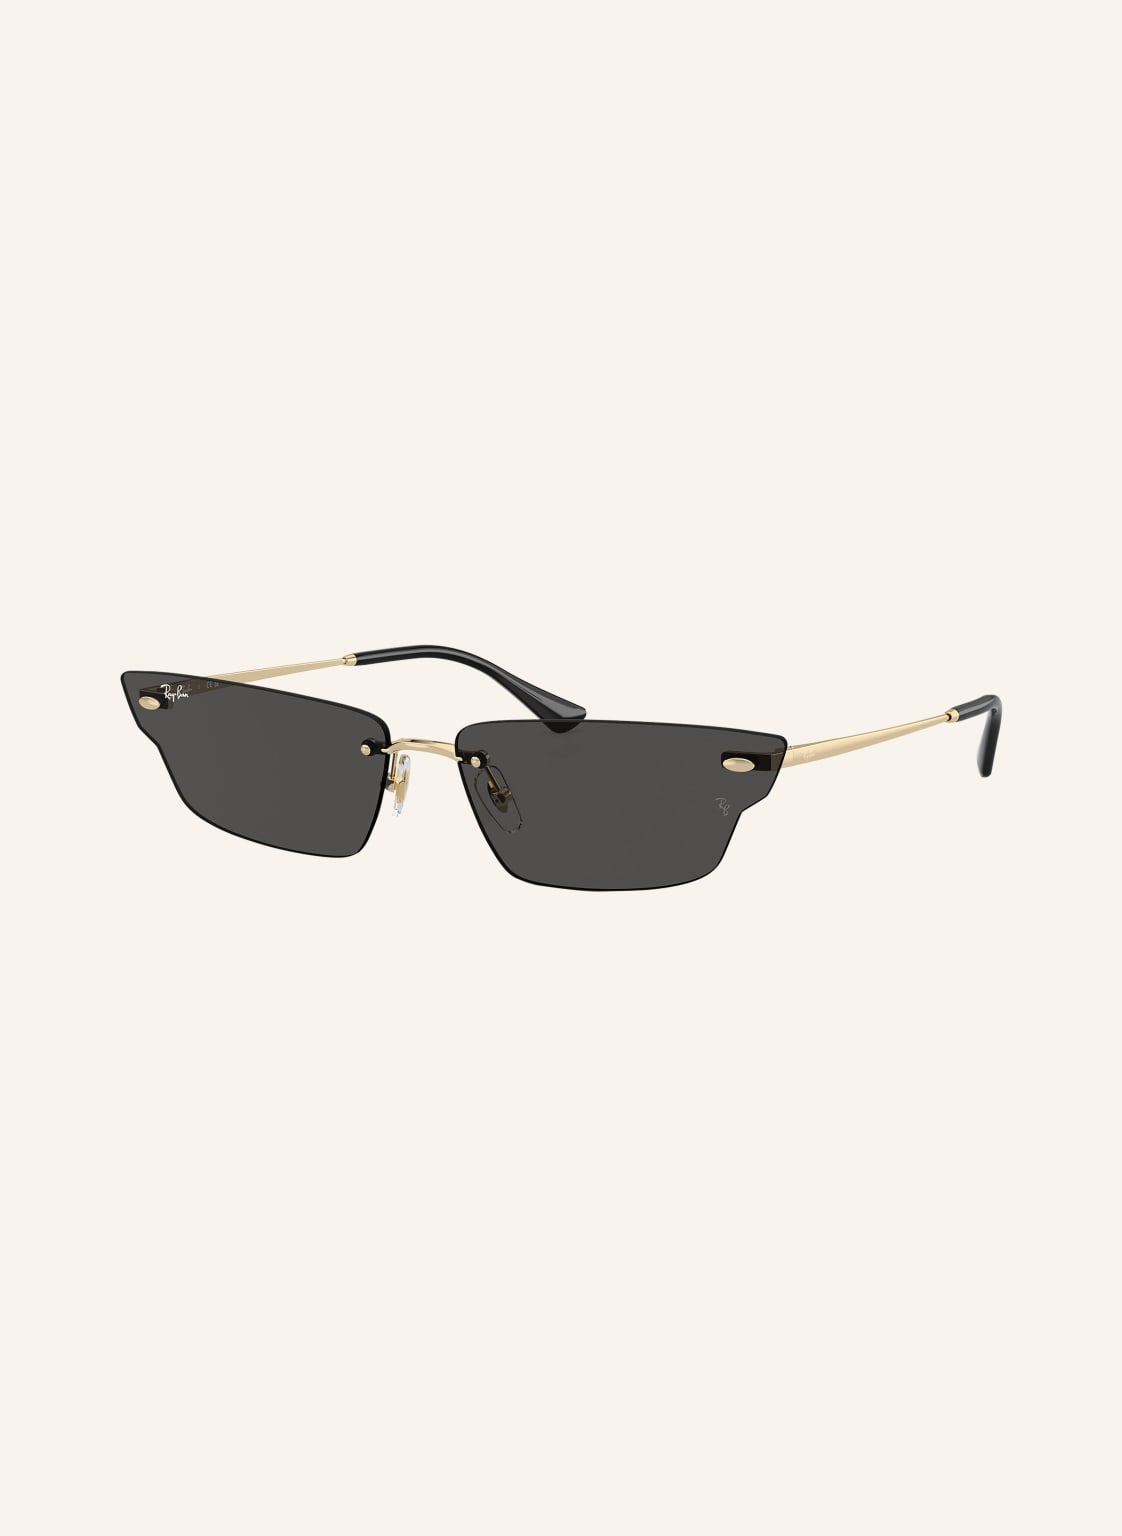 Ray-Ban Sonnenbrille rb3731 Anh gold von Ray-Ban